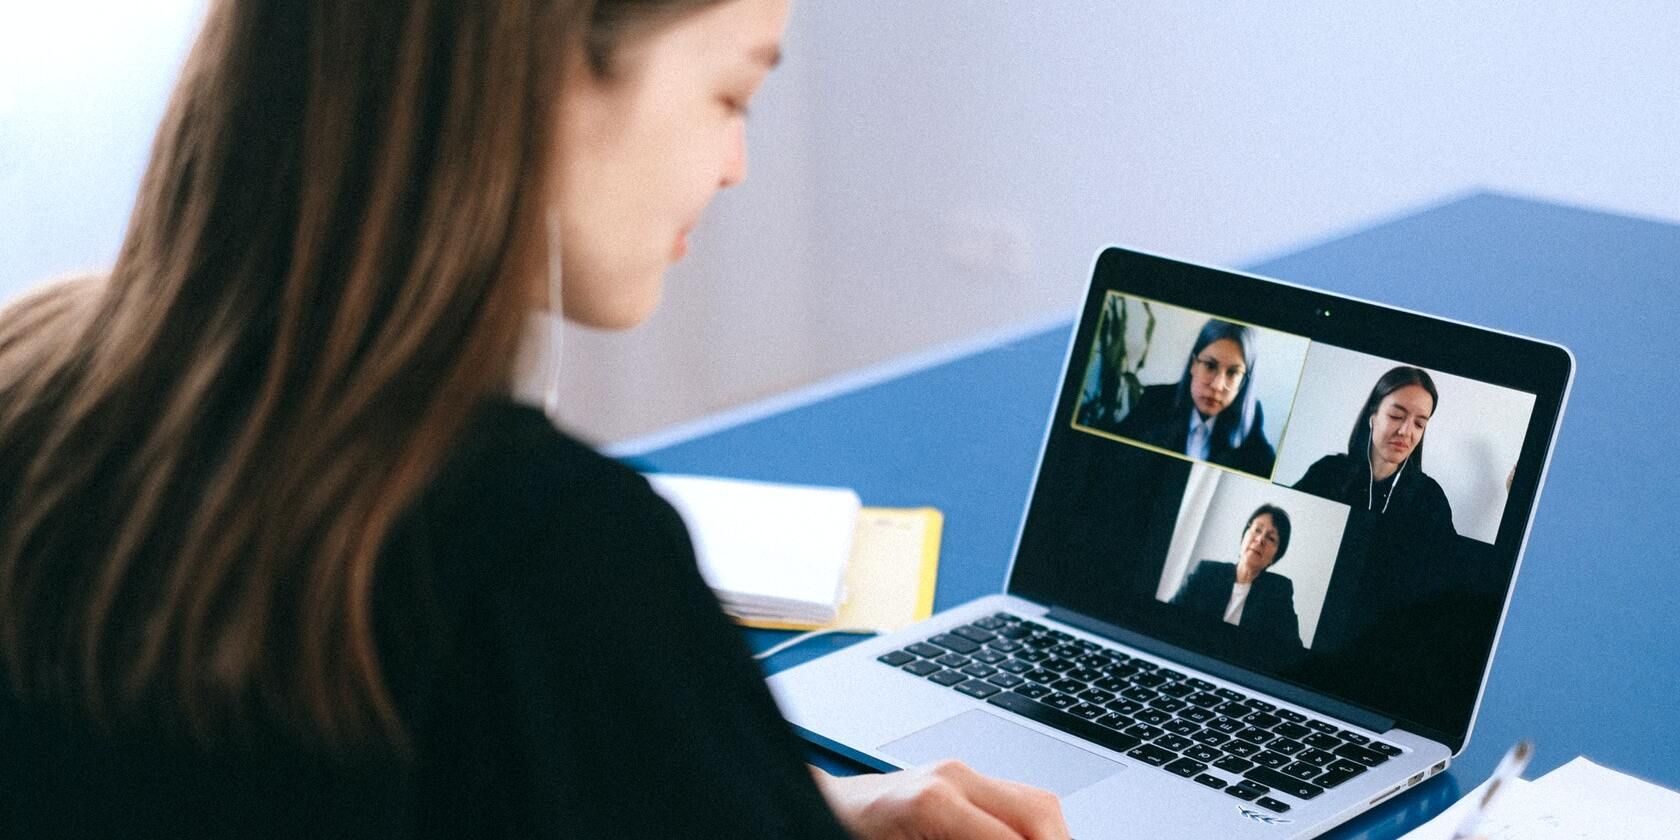 Woman on a video call.